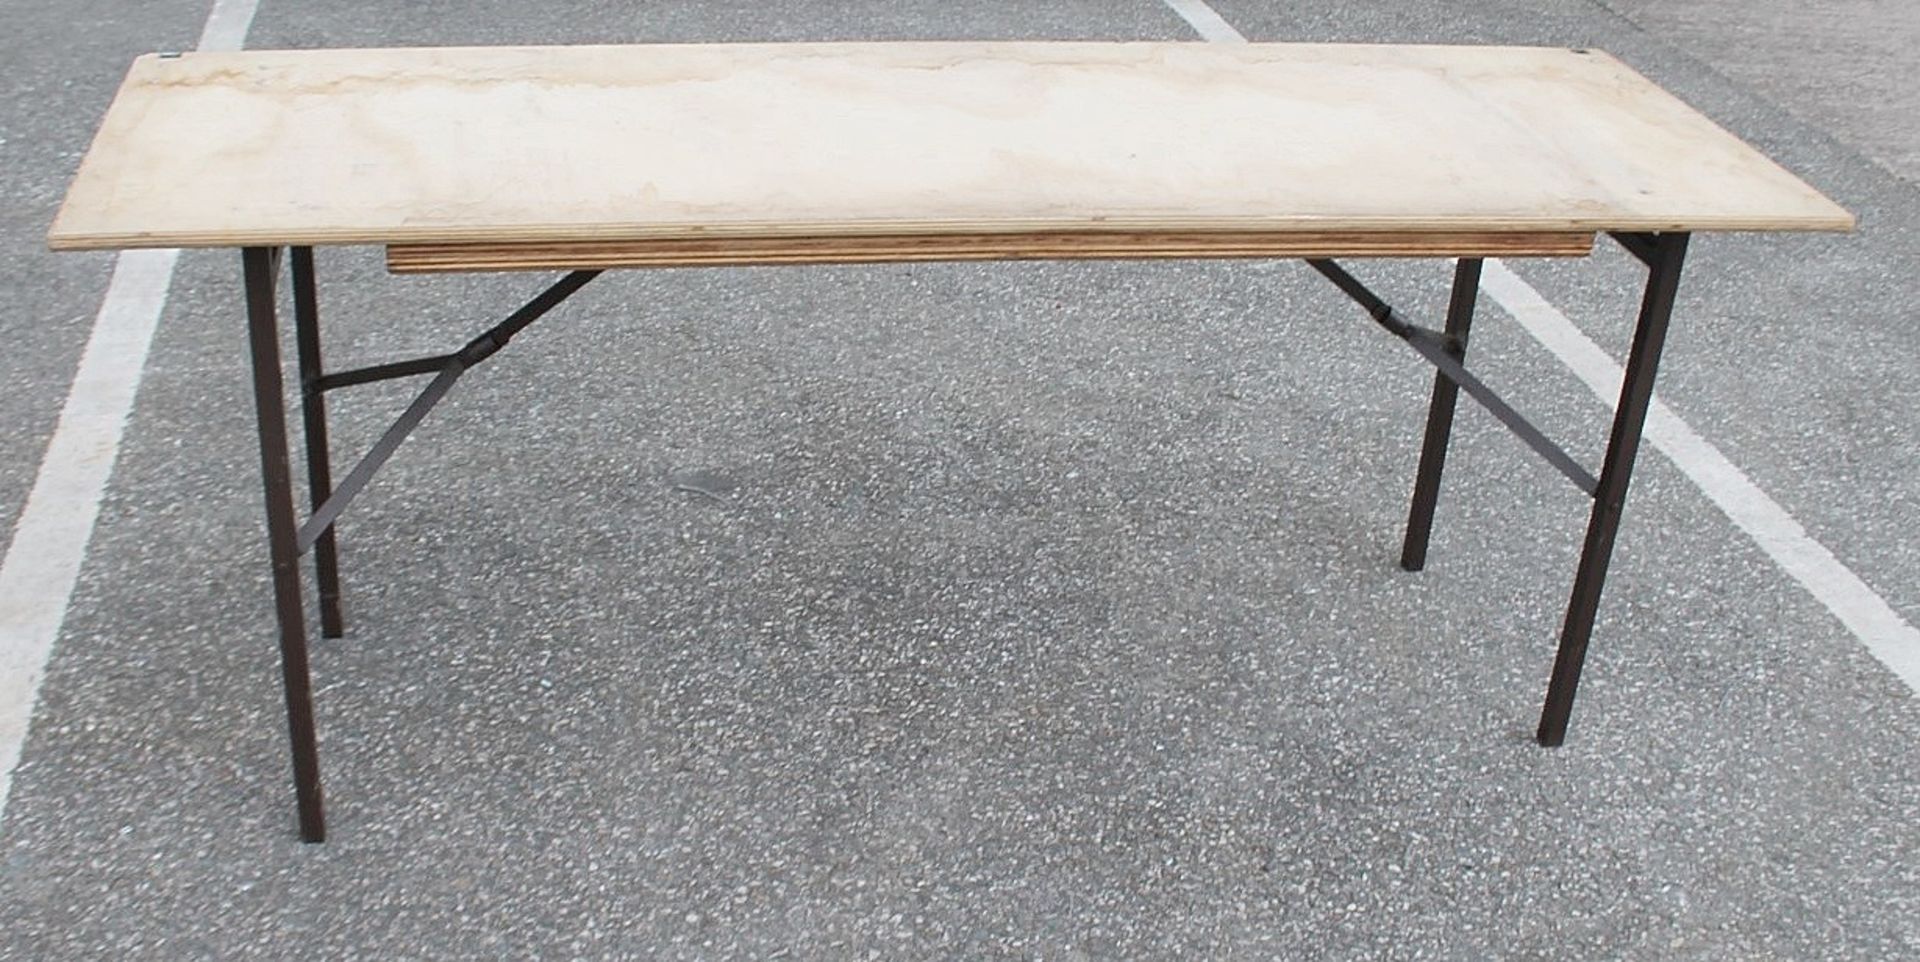 1 x Folding 6ft Wooden Topped Rectangular Trestle Table - Recently Removed From A Well-known